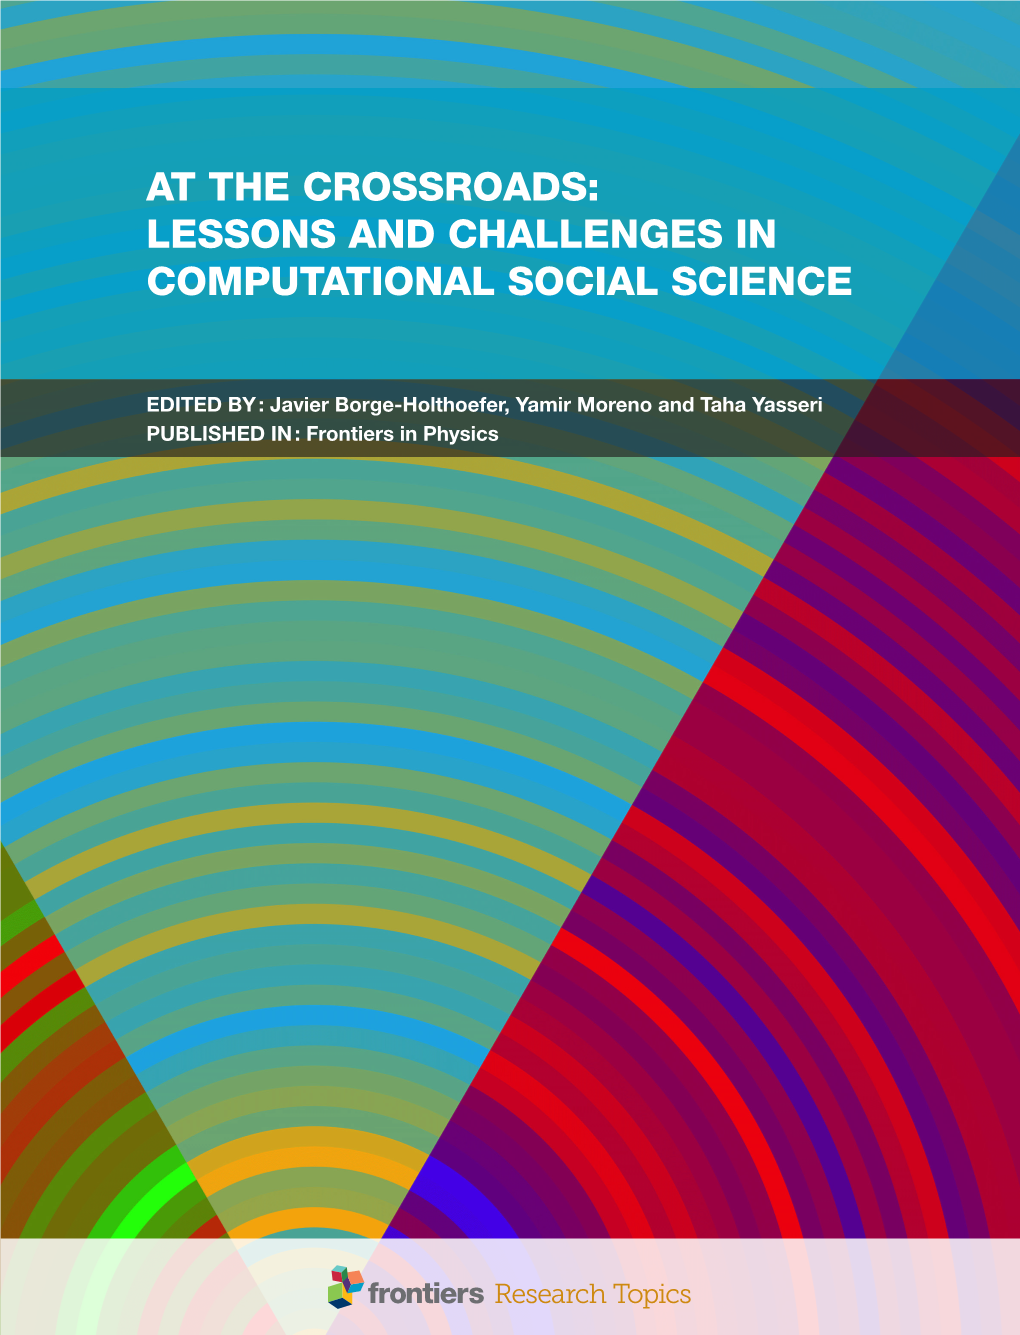 At the Crossroads: Lessons and Challenges in Computational Social Science